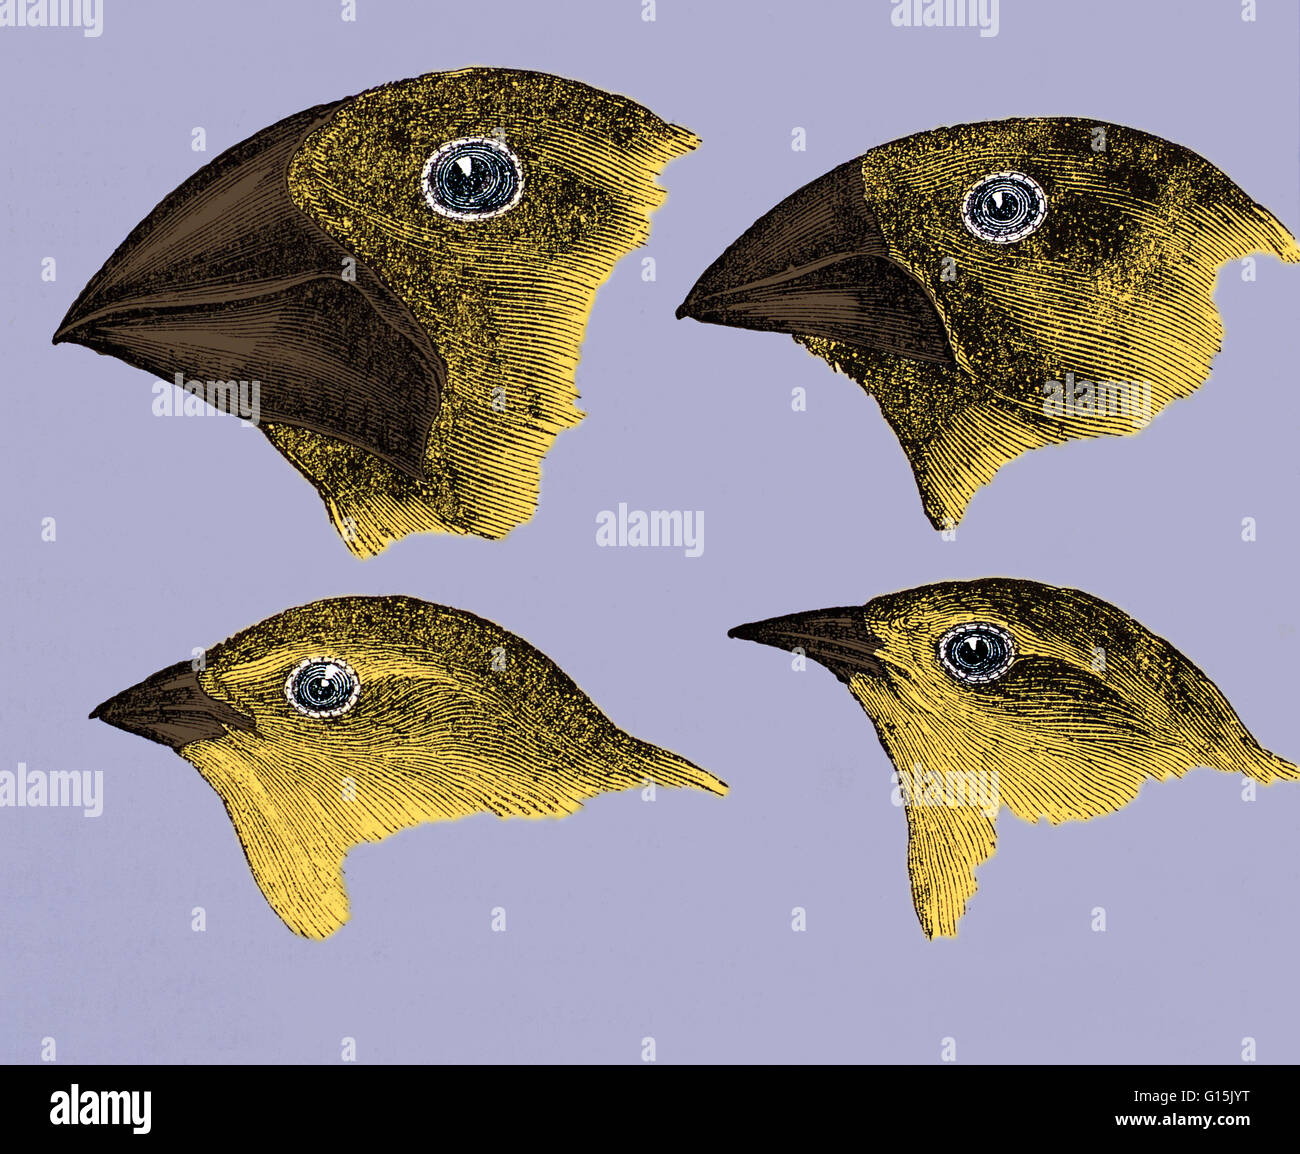 Galapagos finches. Historical artwork of the heads of Galapagos finches, made by Charles Darwin in his book 'A Naturalist's Voyage', London, 1889. These studies aided his theory of evolution. Darwin drew the conclusion that they all came from a common anc Stock Photo